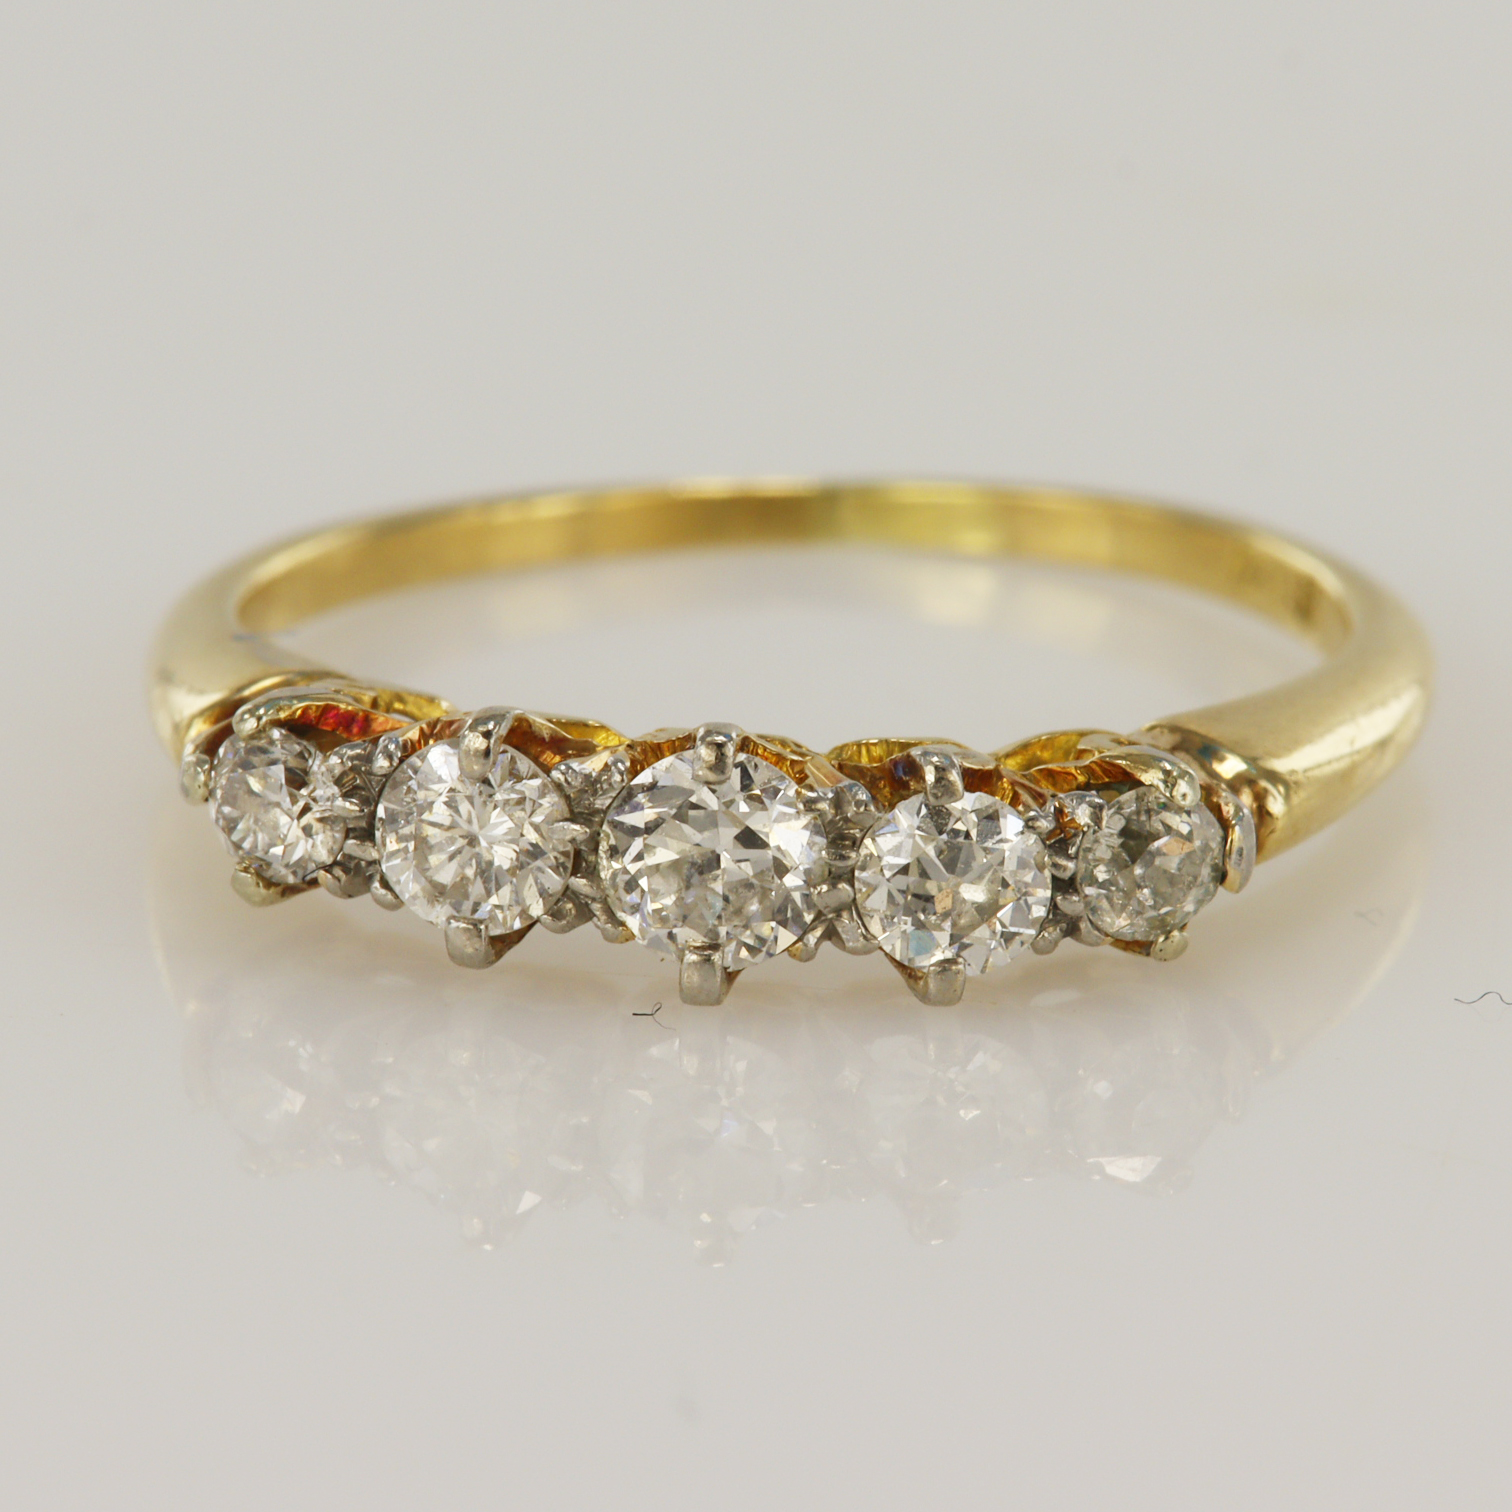 Yellow gold (tests 18ct) vintage diamond ring, five graduating old cut diamonds, TDW approx. 0.45ct,